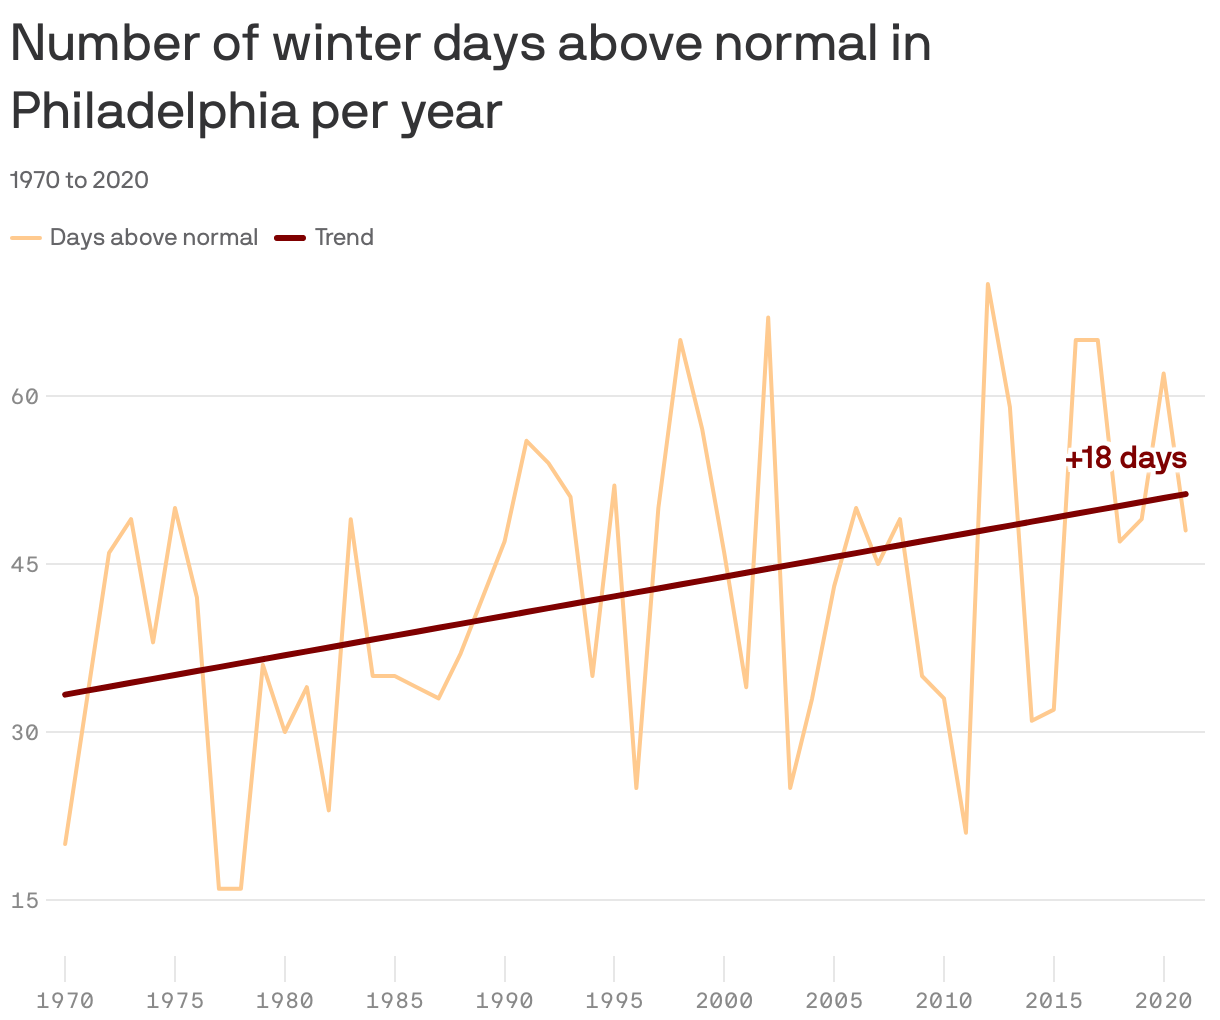 Number of winter days above normal in Philadelphia per year